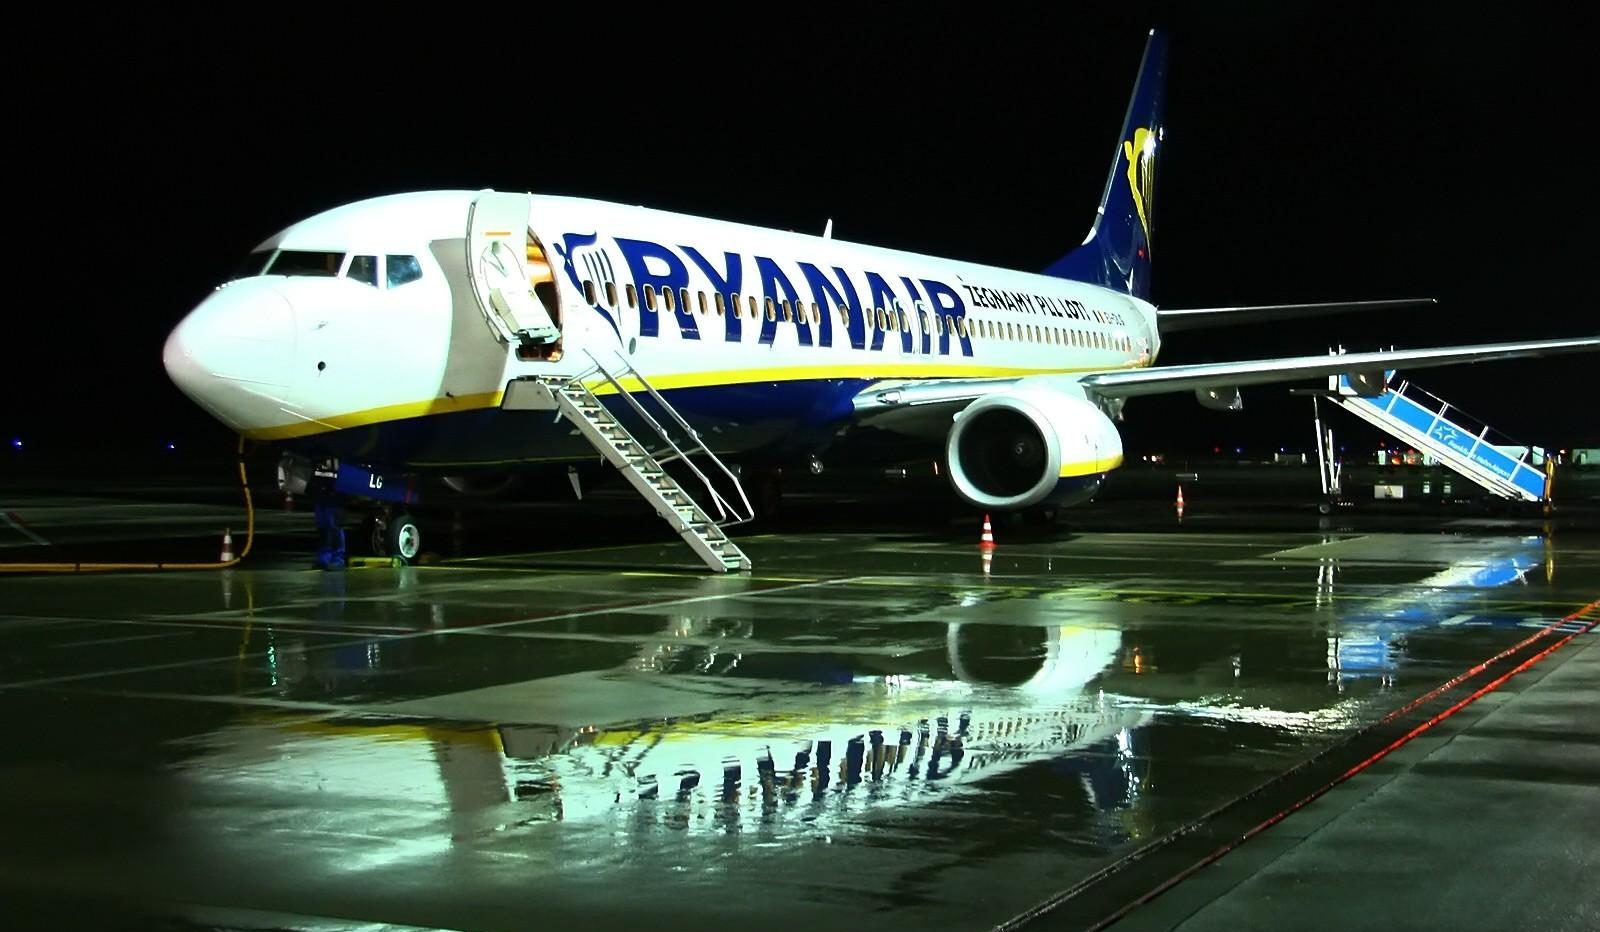 Ryanair Announces Plan to Cancel Thousands of Flights in a Bid to "Improve Punctuality"